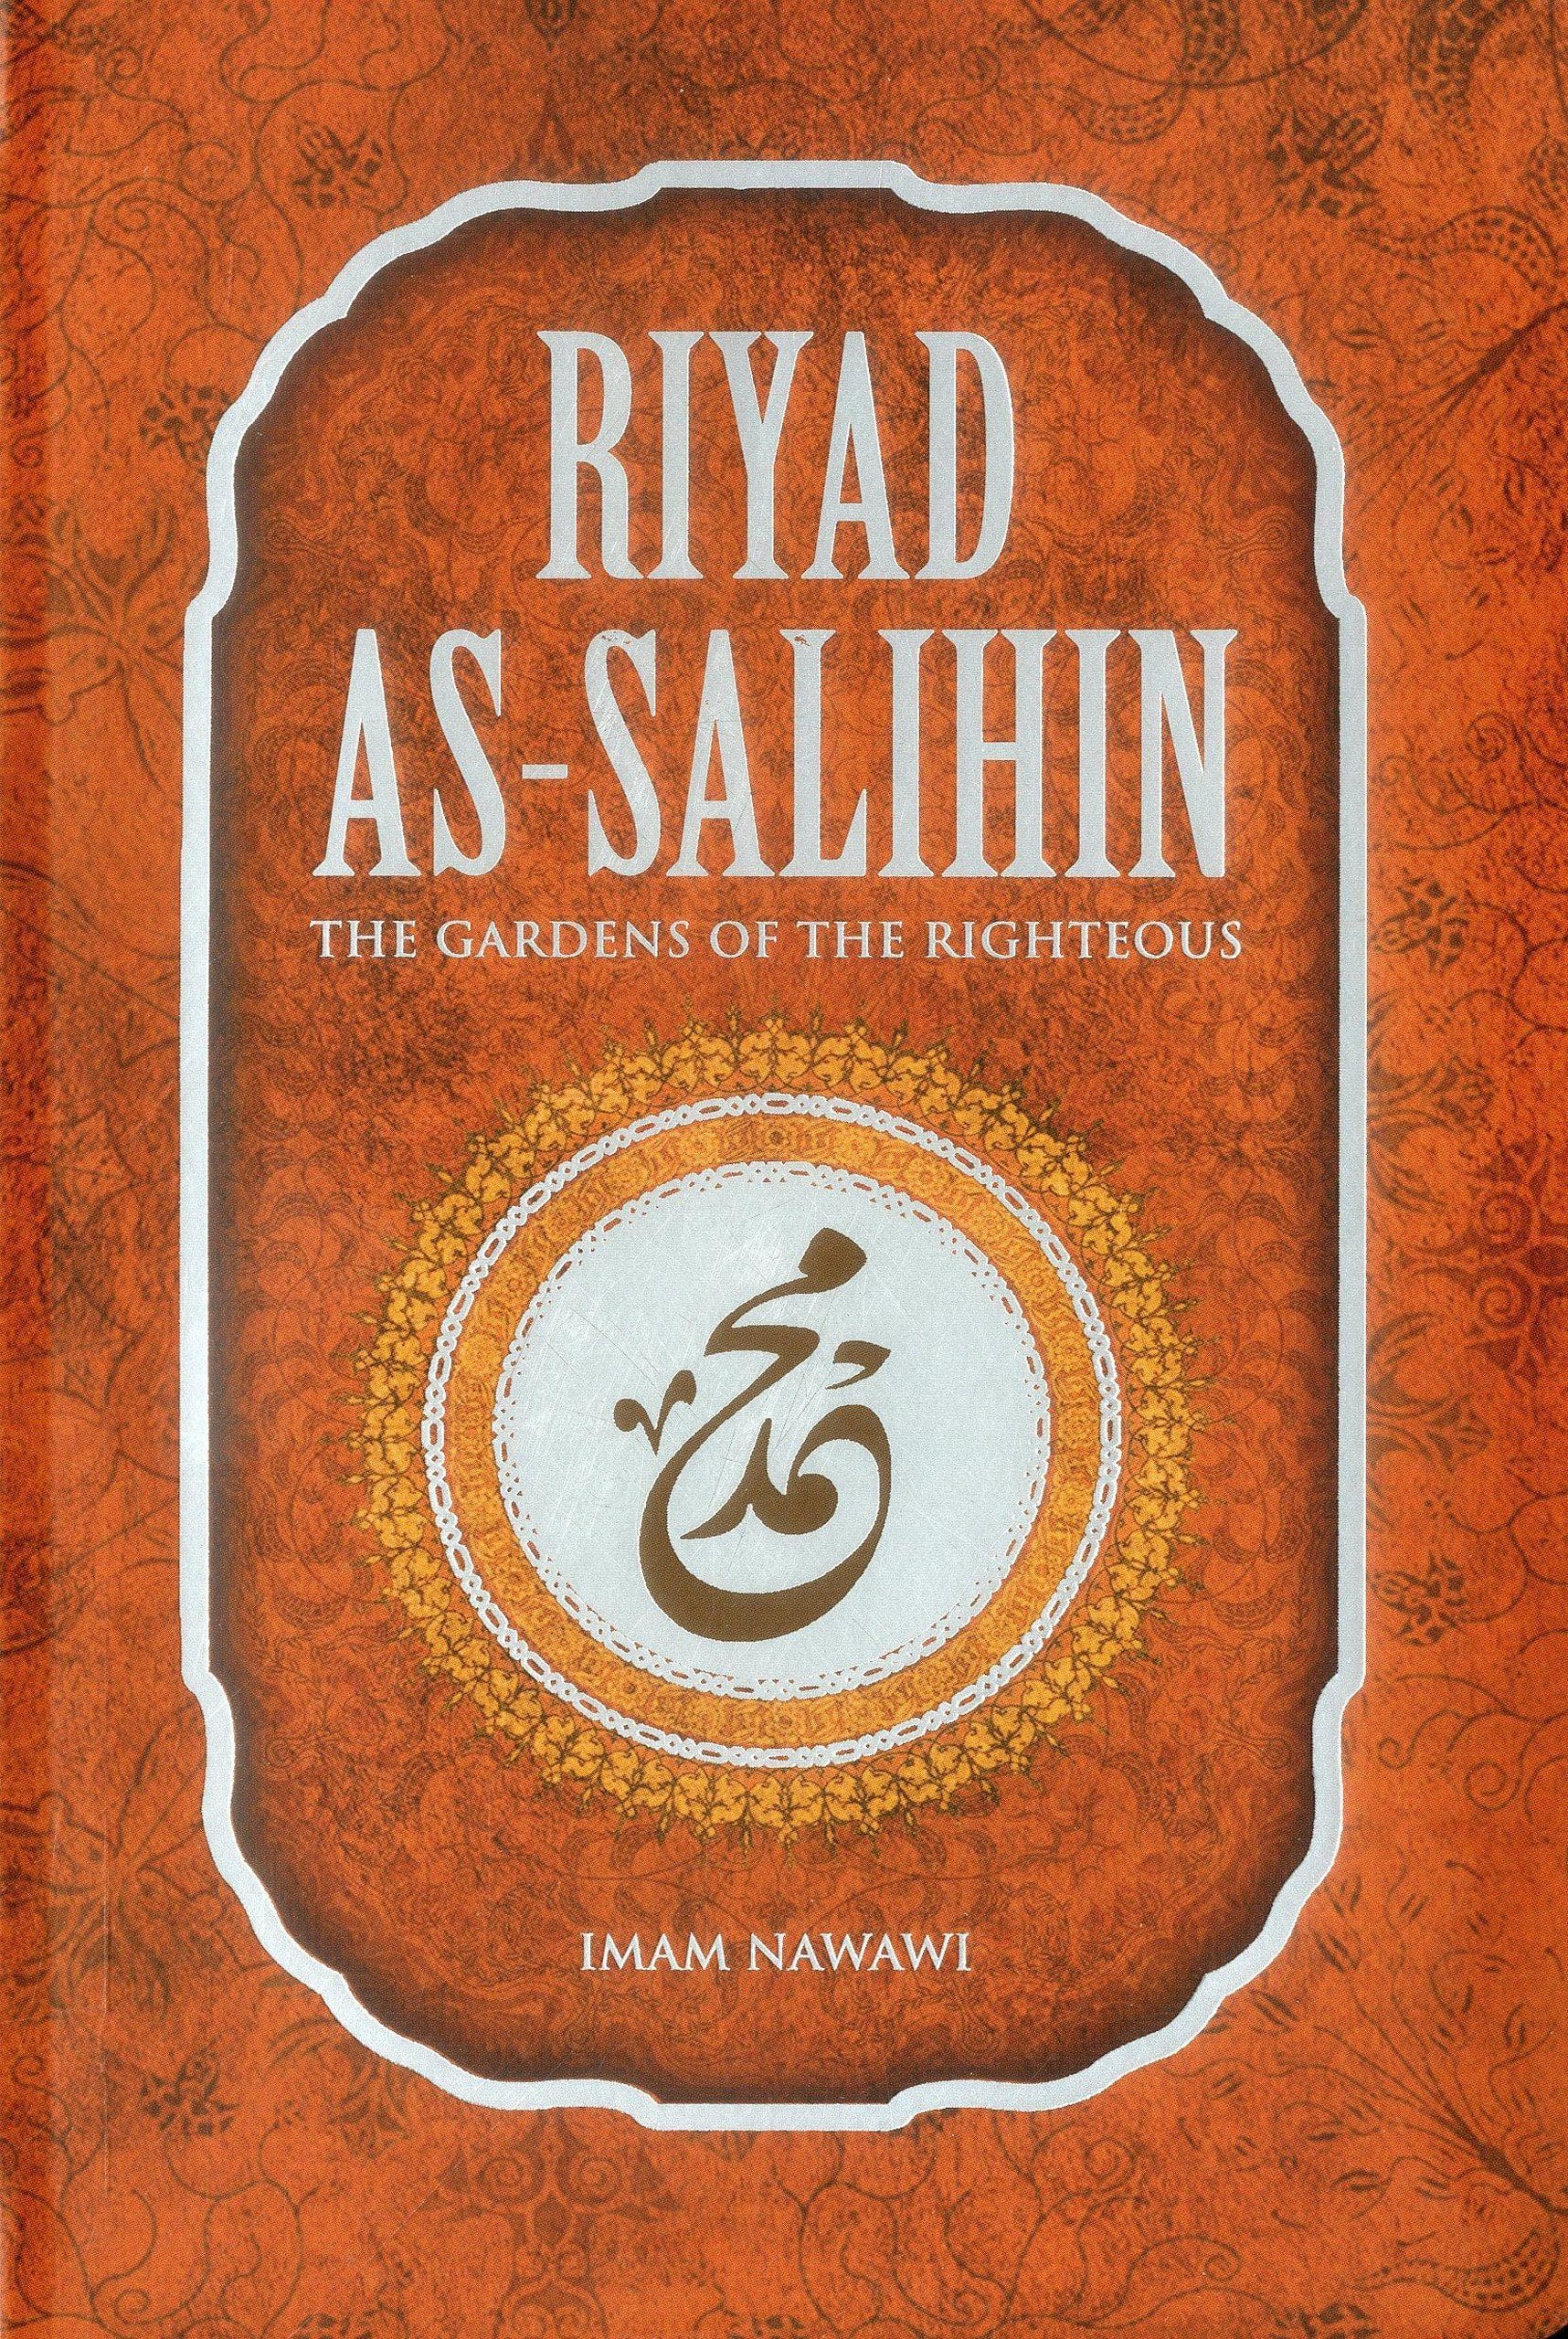 islamic book review in english